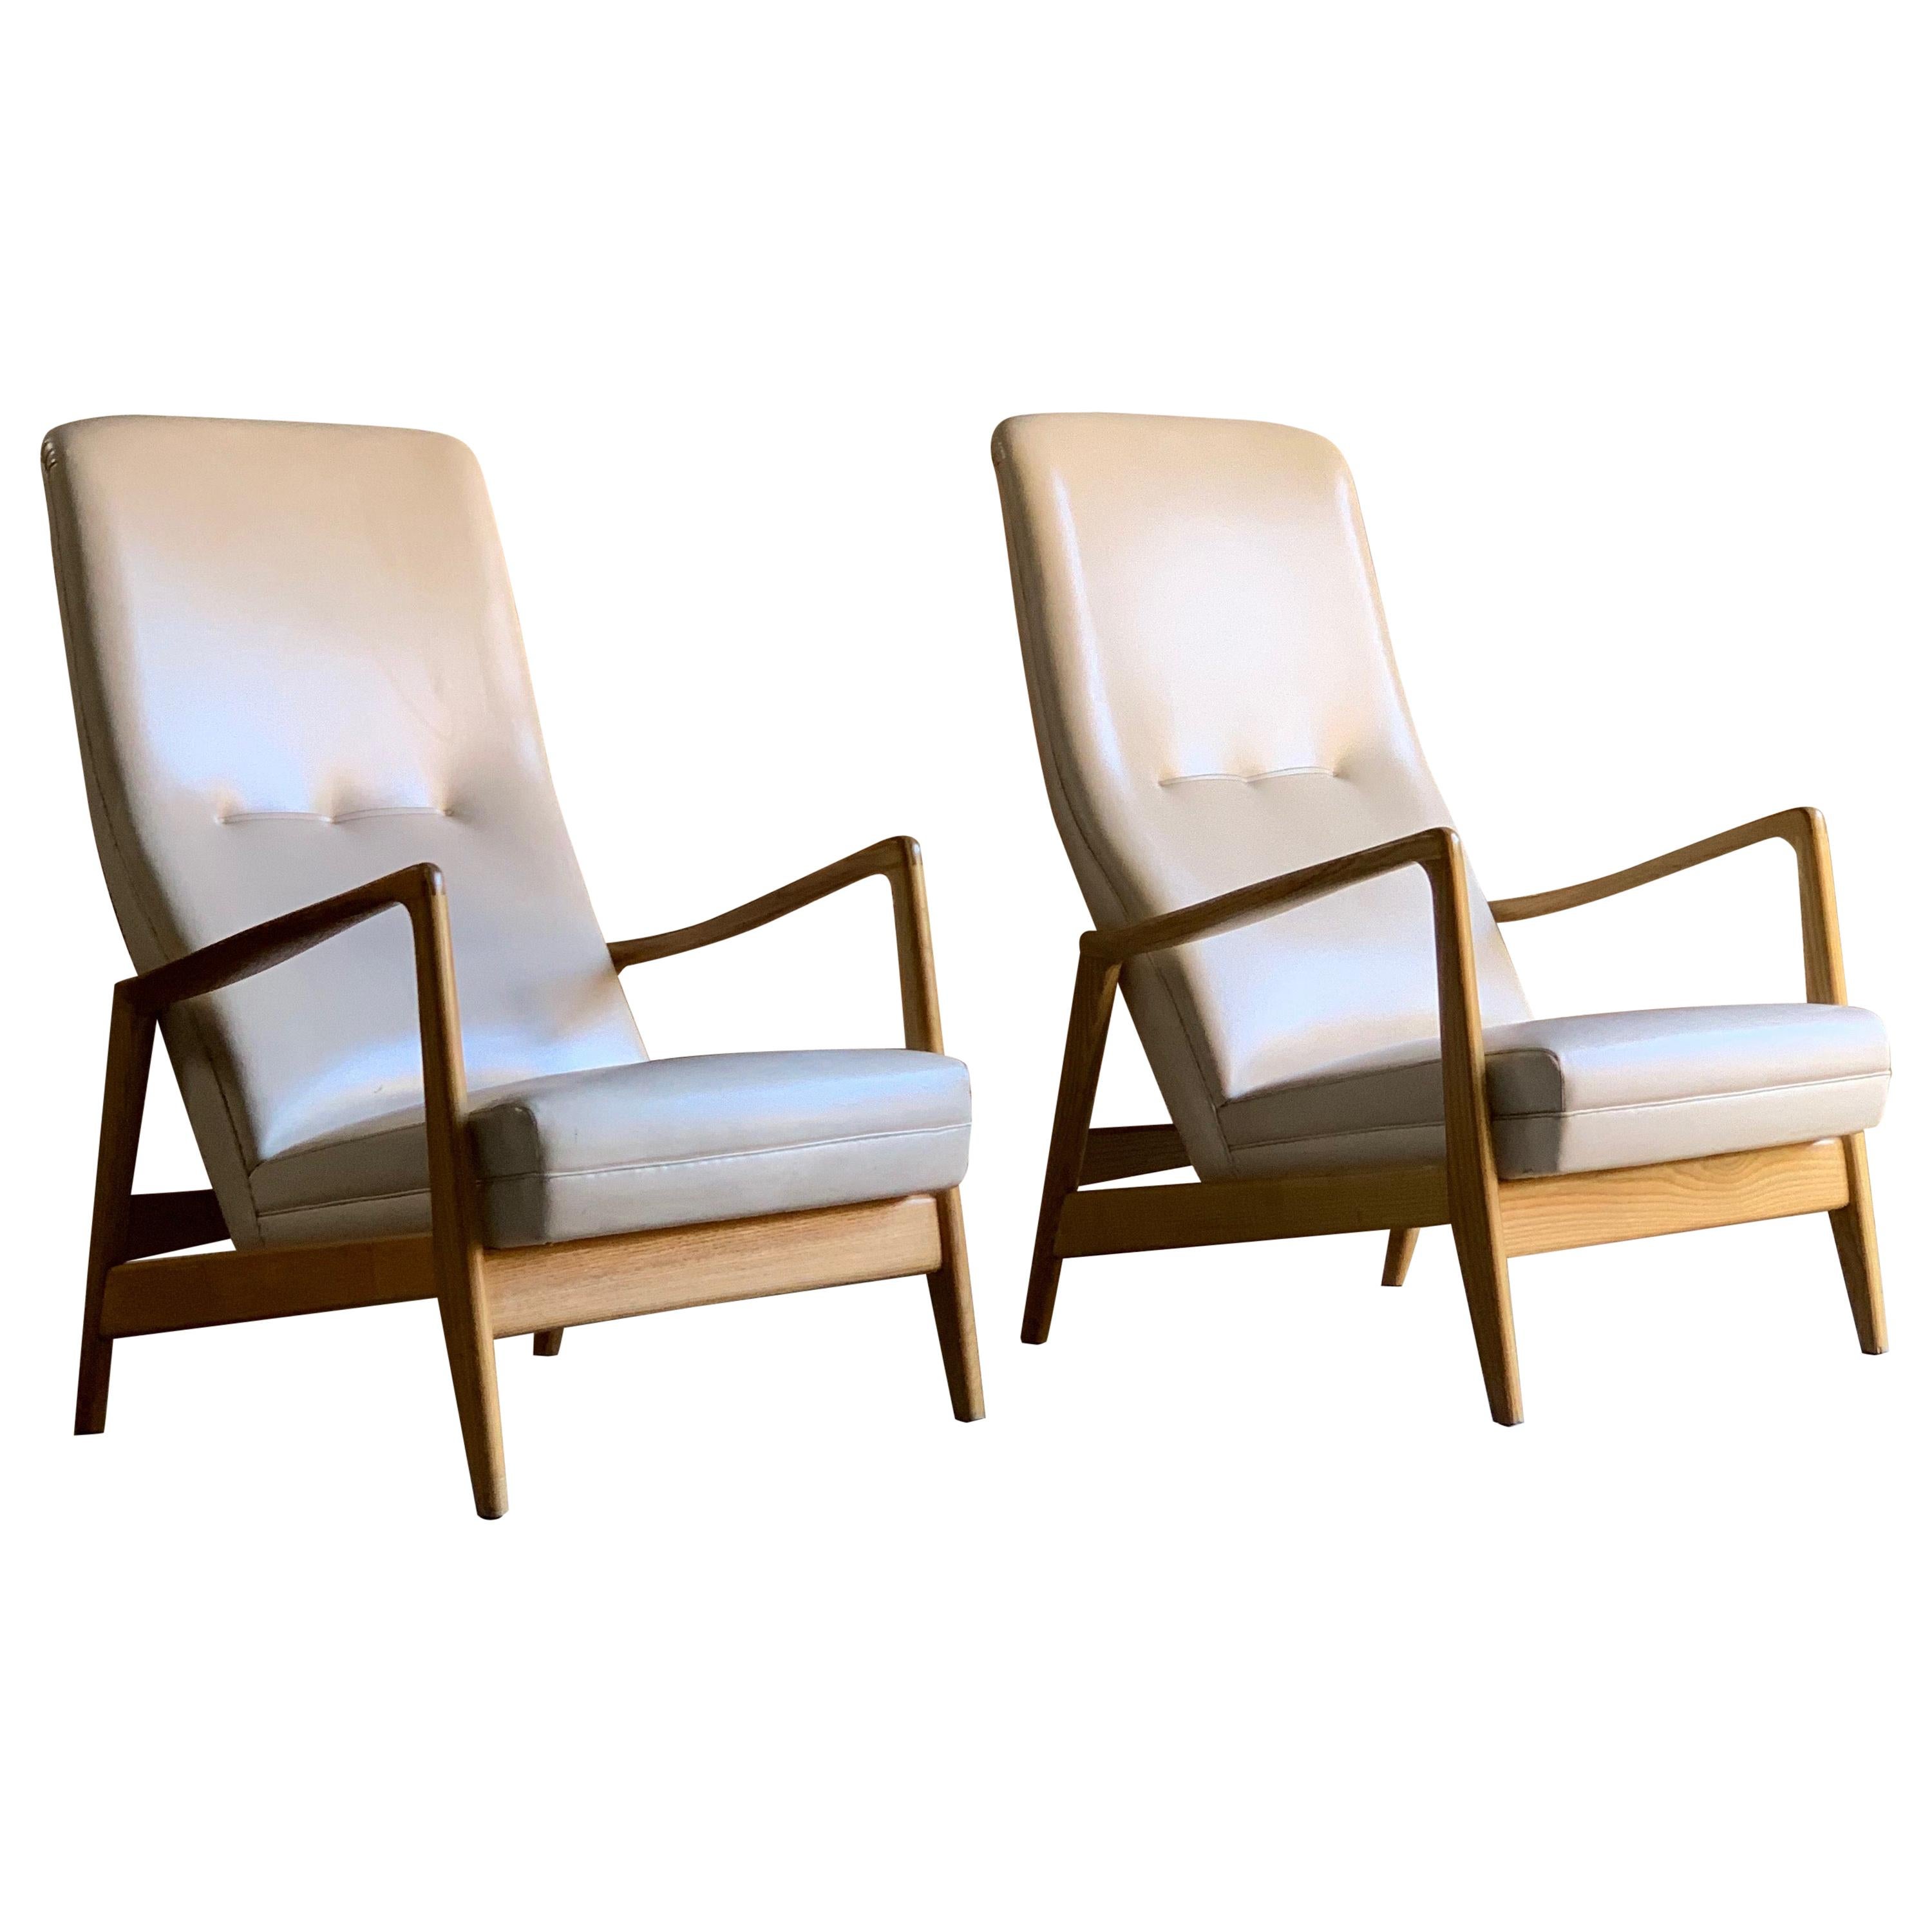 Gio Ponti Pair of Ash Lounge Chairs by Cassina, Italy, circa 1958